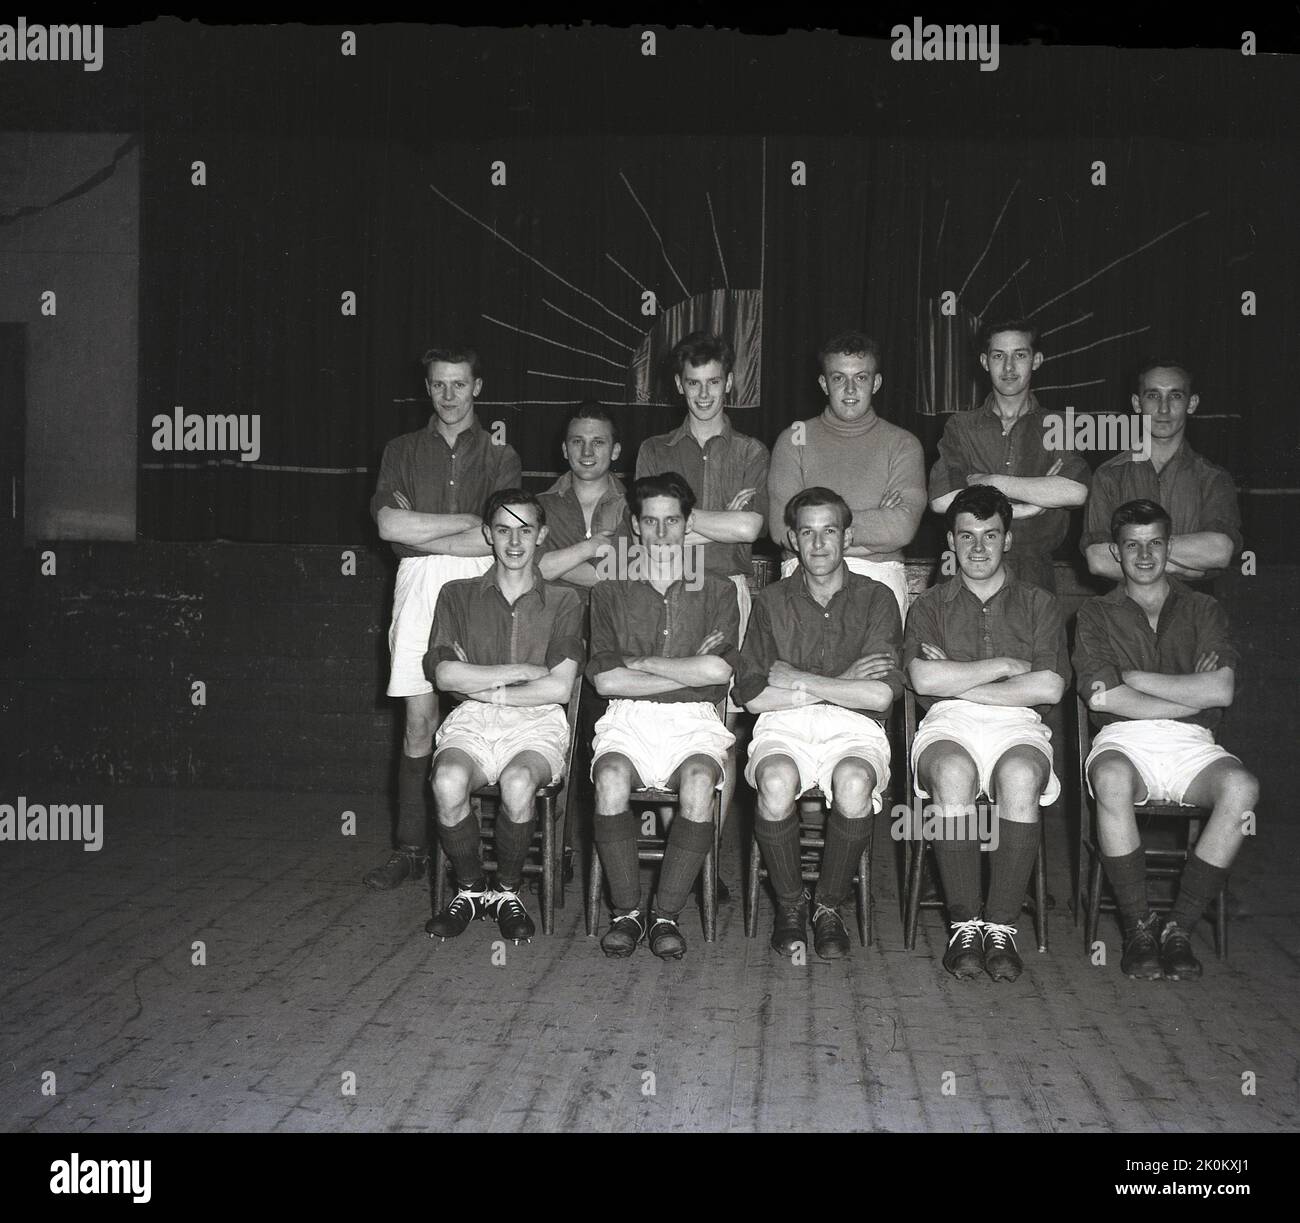 1956, historical, group photo in village hall of St Mary's football team with trophies, Leeds, England, UK. Stock Photo